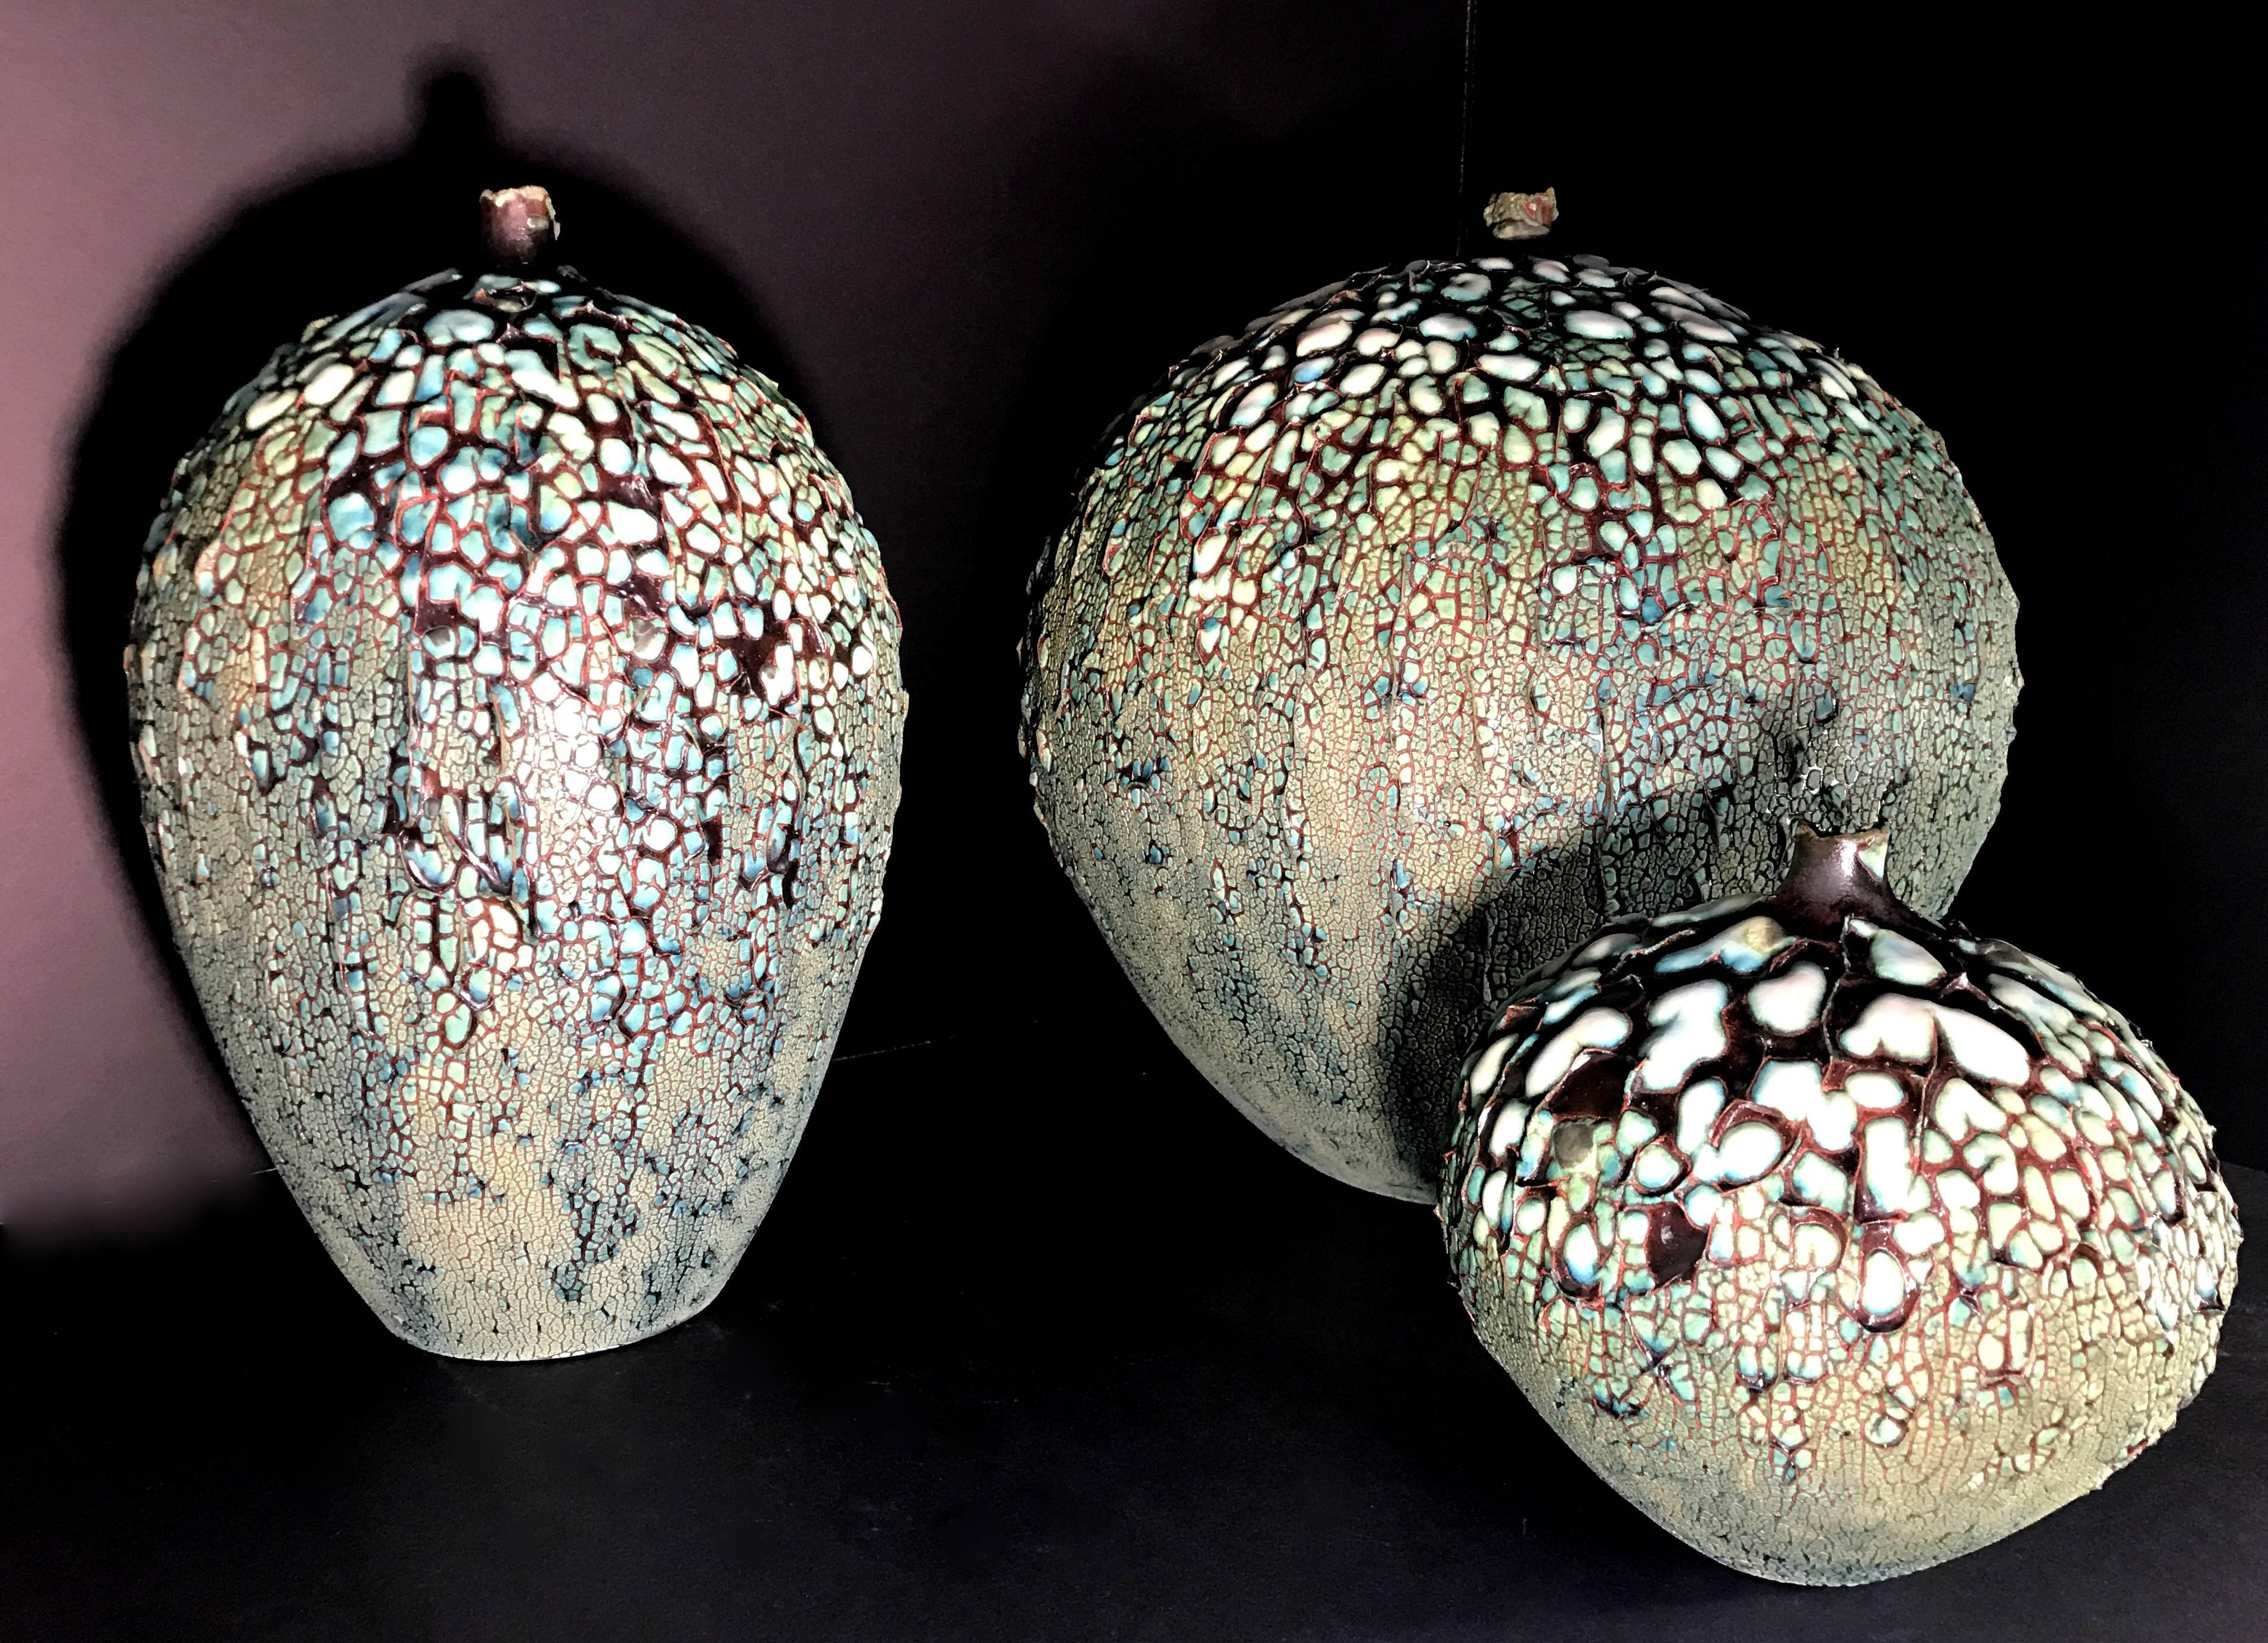 Four beautifully textured glazed vessels. The metallic glaze mimics the metal frame used for stained glass creating a Tiffany Wisteria lampshade effect. Each vase can be purchased individually upon request or altogether at the listed